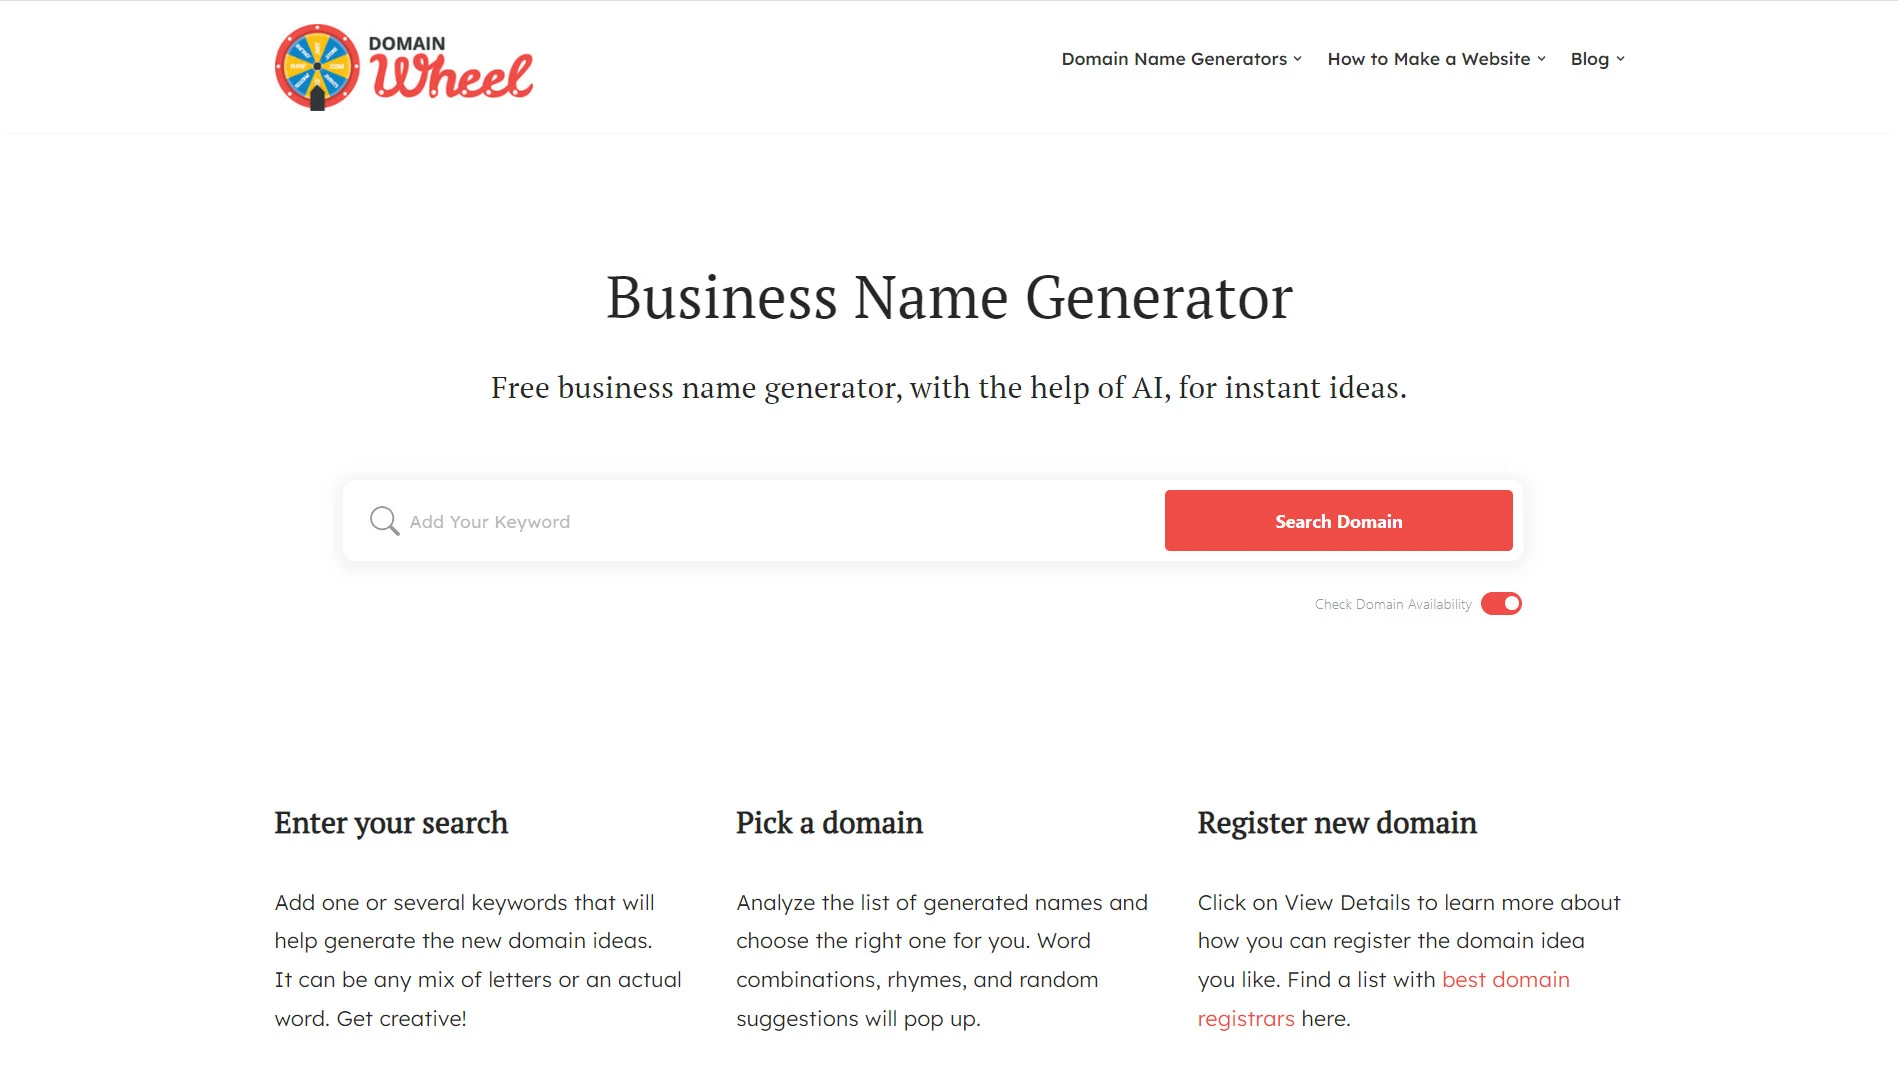 Domain Wheel business name generator to find good store names